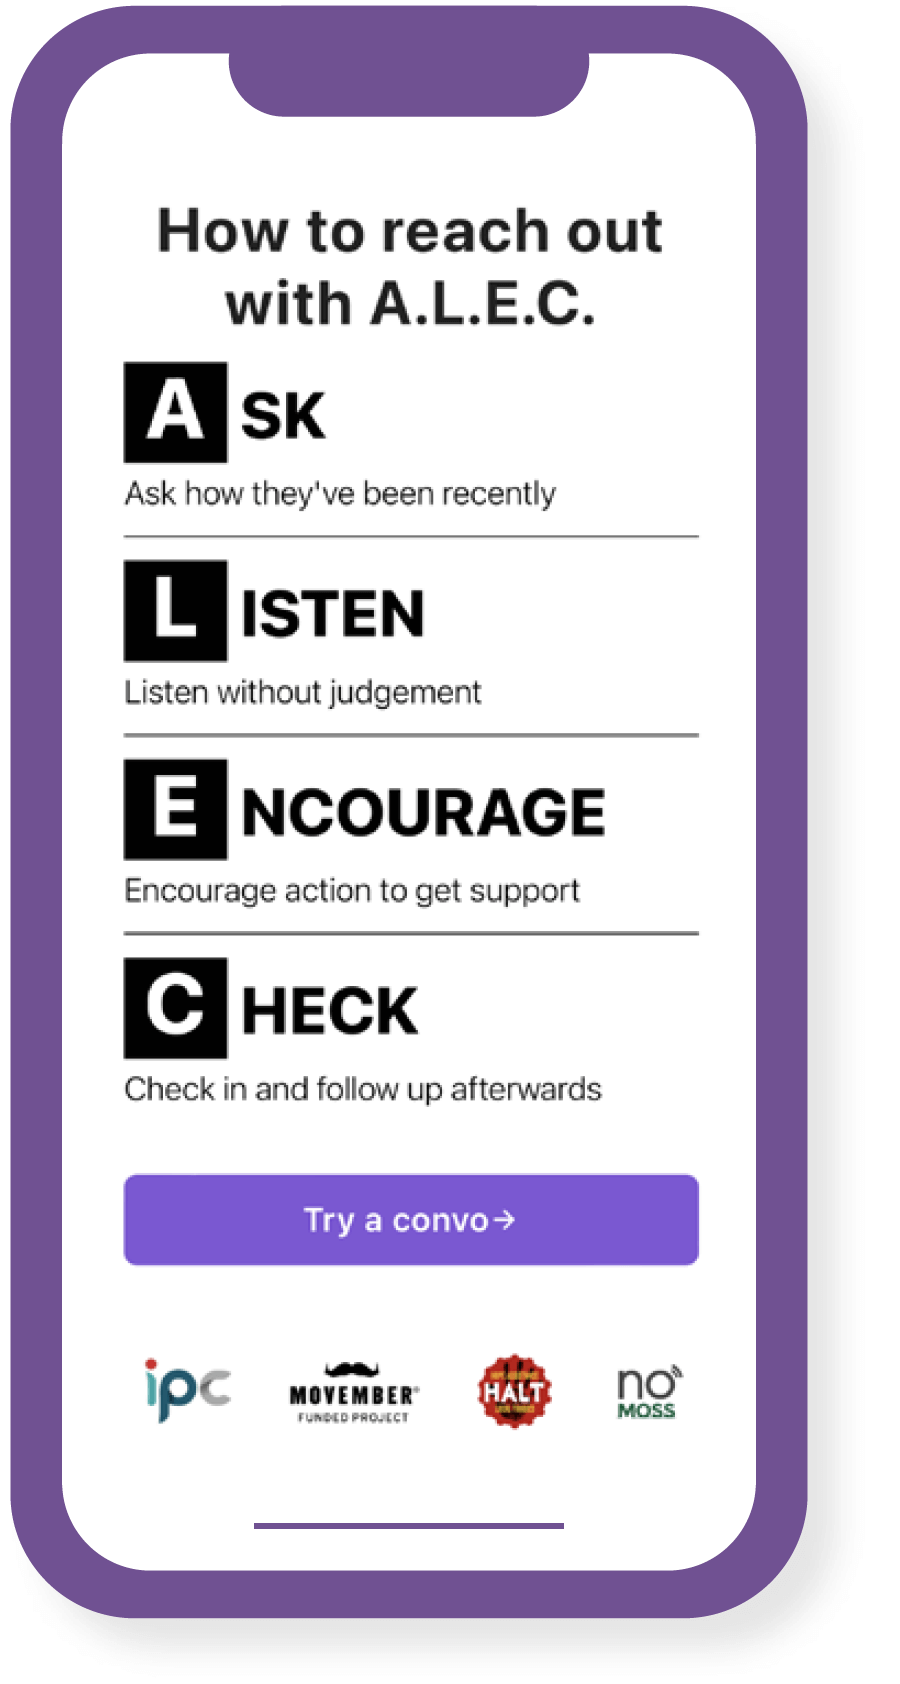 Graphic of a smartphone showing the A.L.E.C. model ‐ Ask, Listen, Encourage, Check.